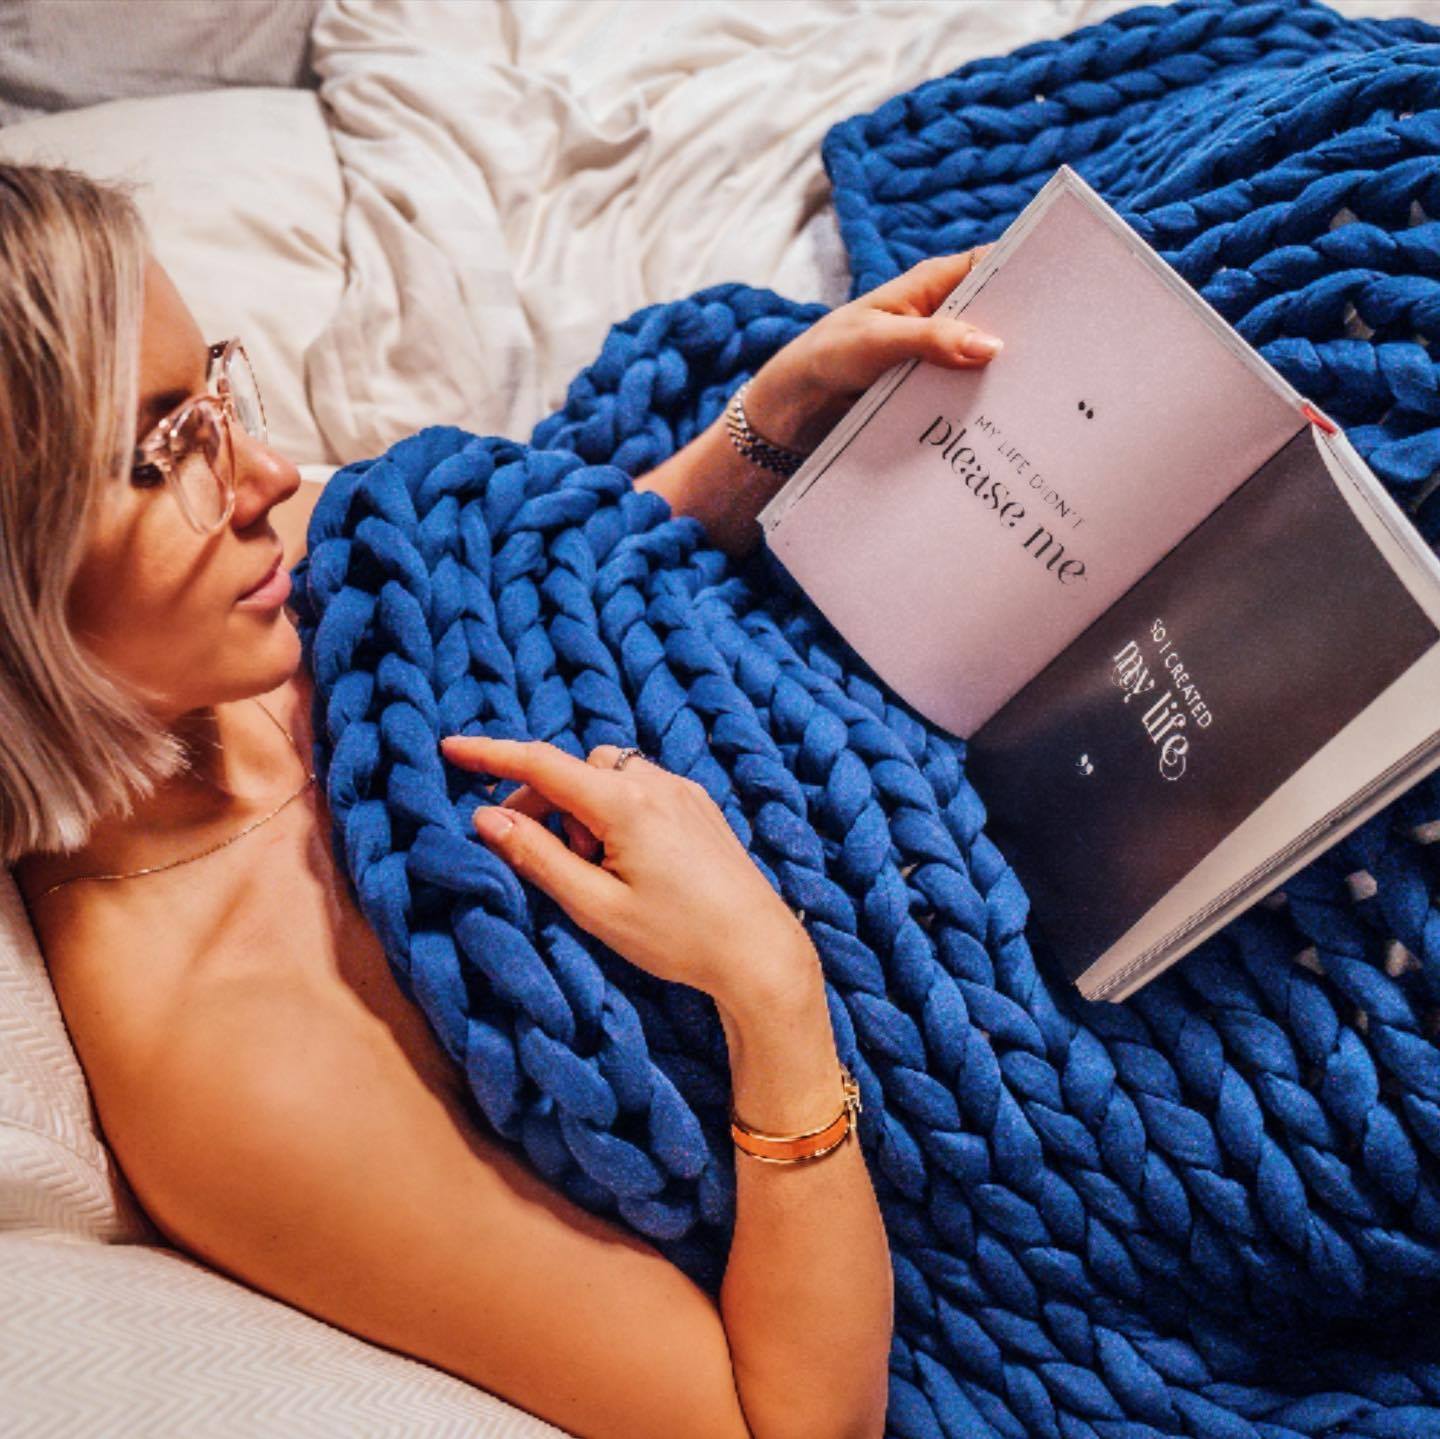 A woman reads a book in bed in a blue knitted weighted blanket